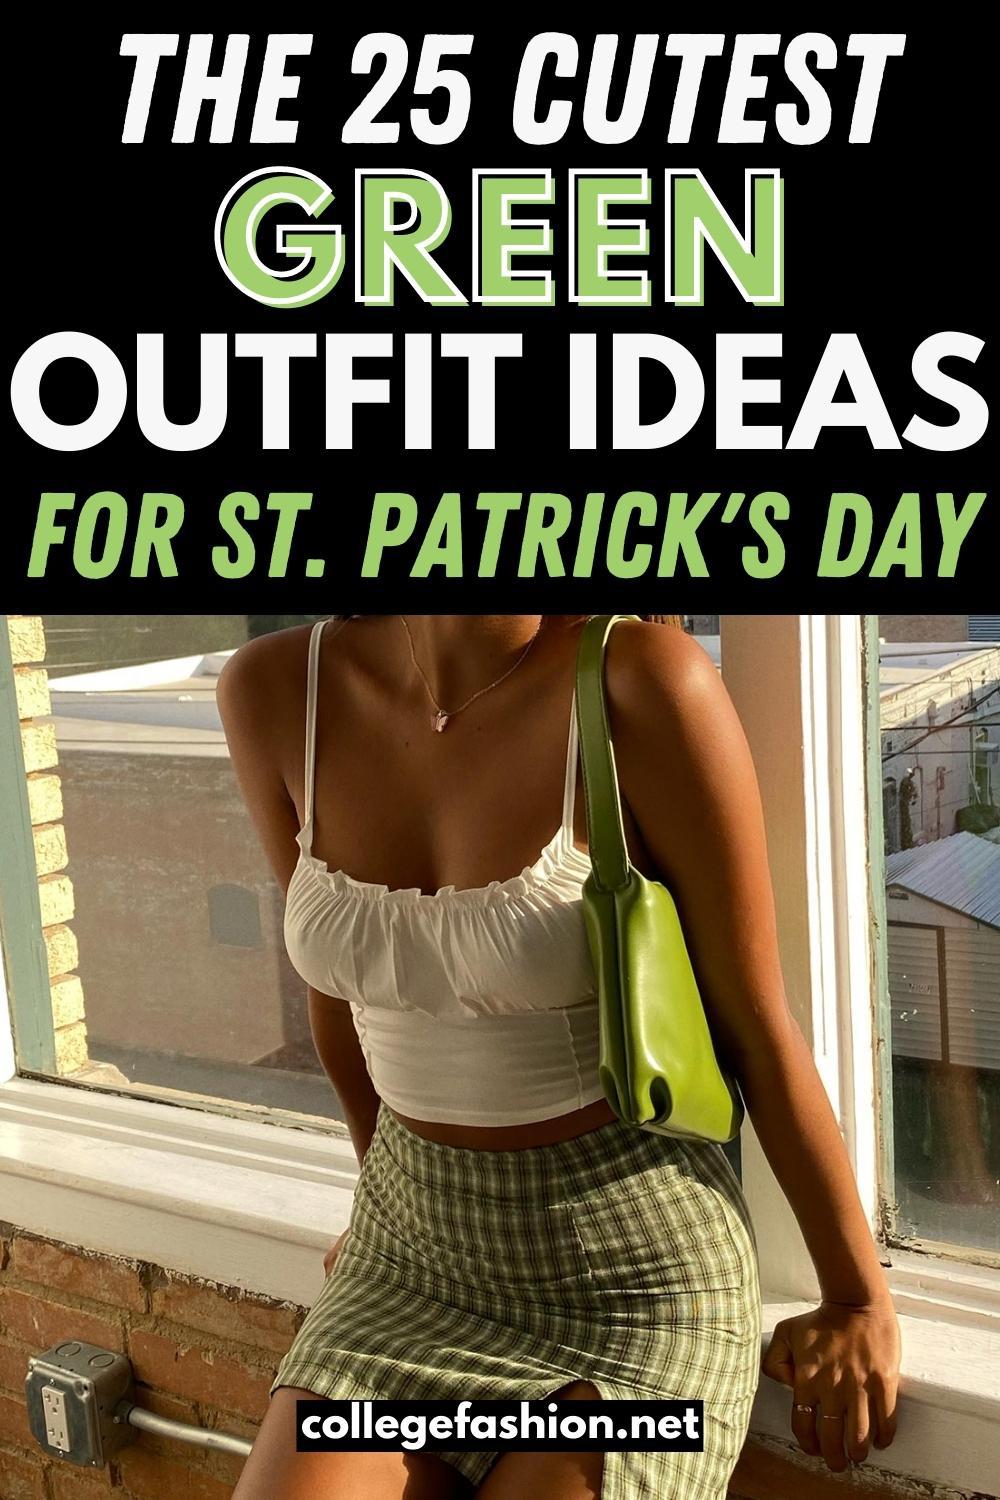 St. Patrick's Day Outfits: 25 Insanely Cute Green Outfit Ideas